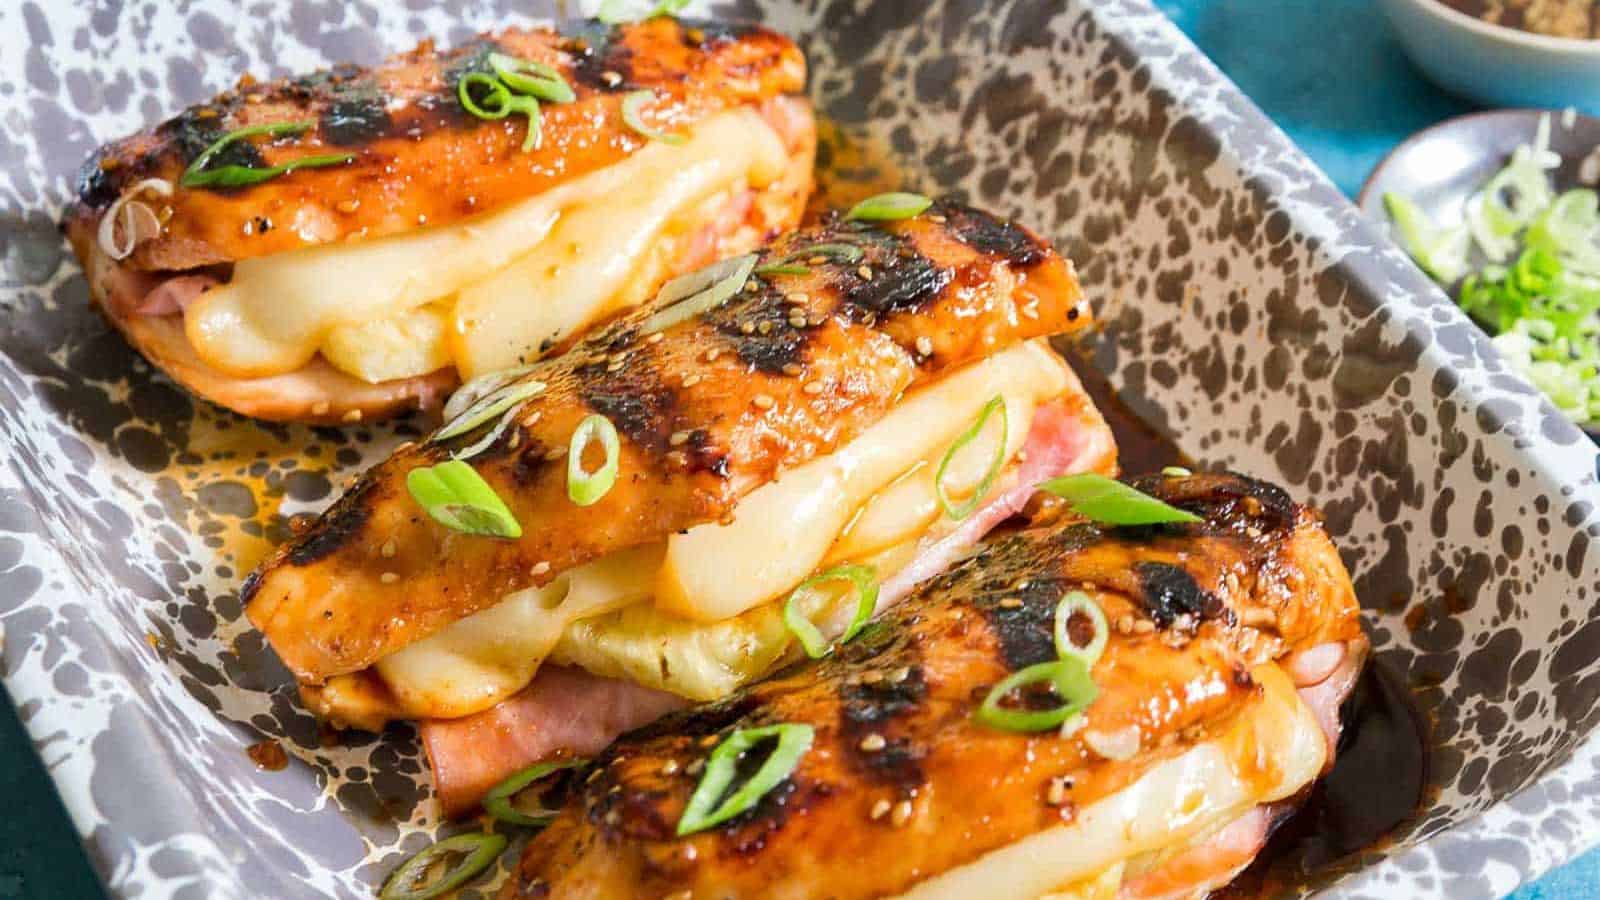 Grilled chicken breasts stuffed with ham, pineapple and Jarlsberg cheese garnished with green onion.